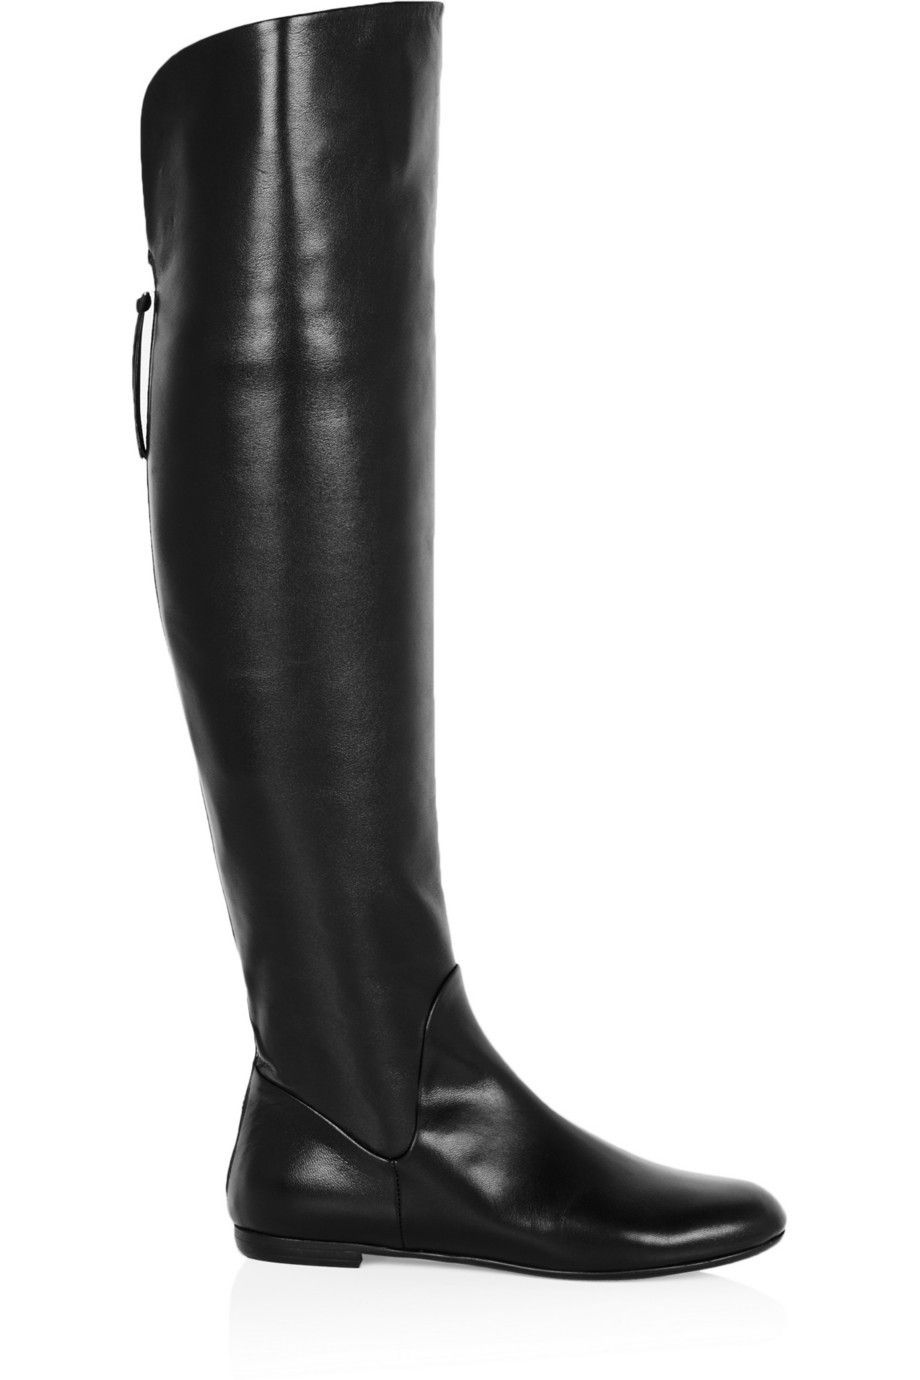 Footwear, Boot, Shoe, Leather, Fashion, Black, Riding boot, Knee-high boot, Liver, Fashion design, 